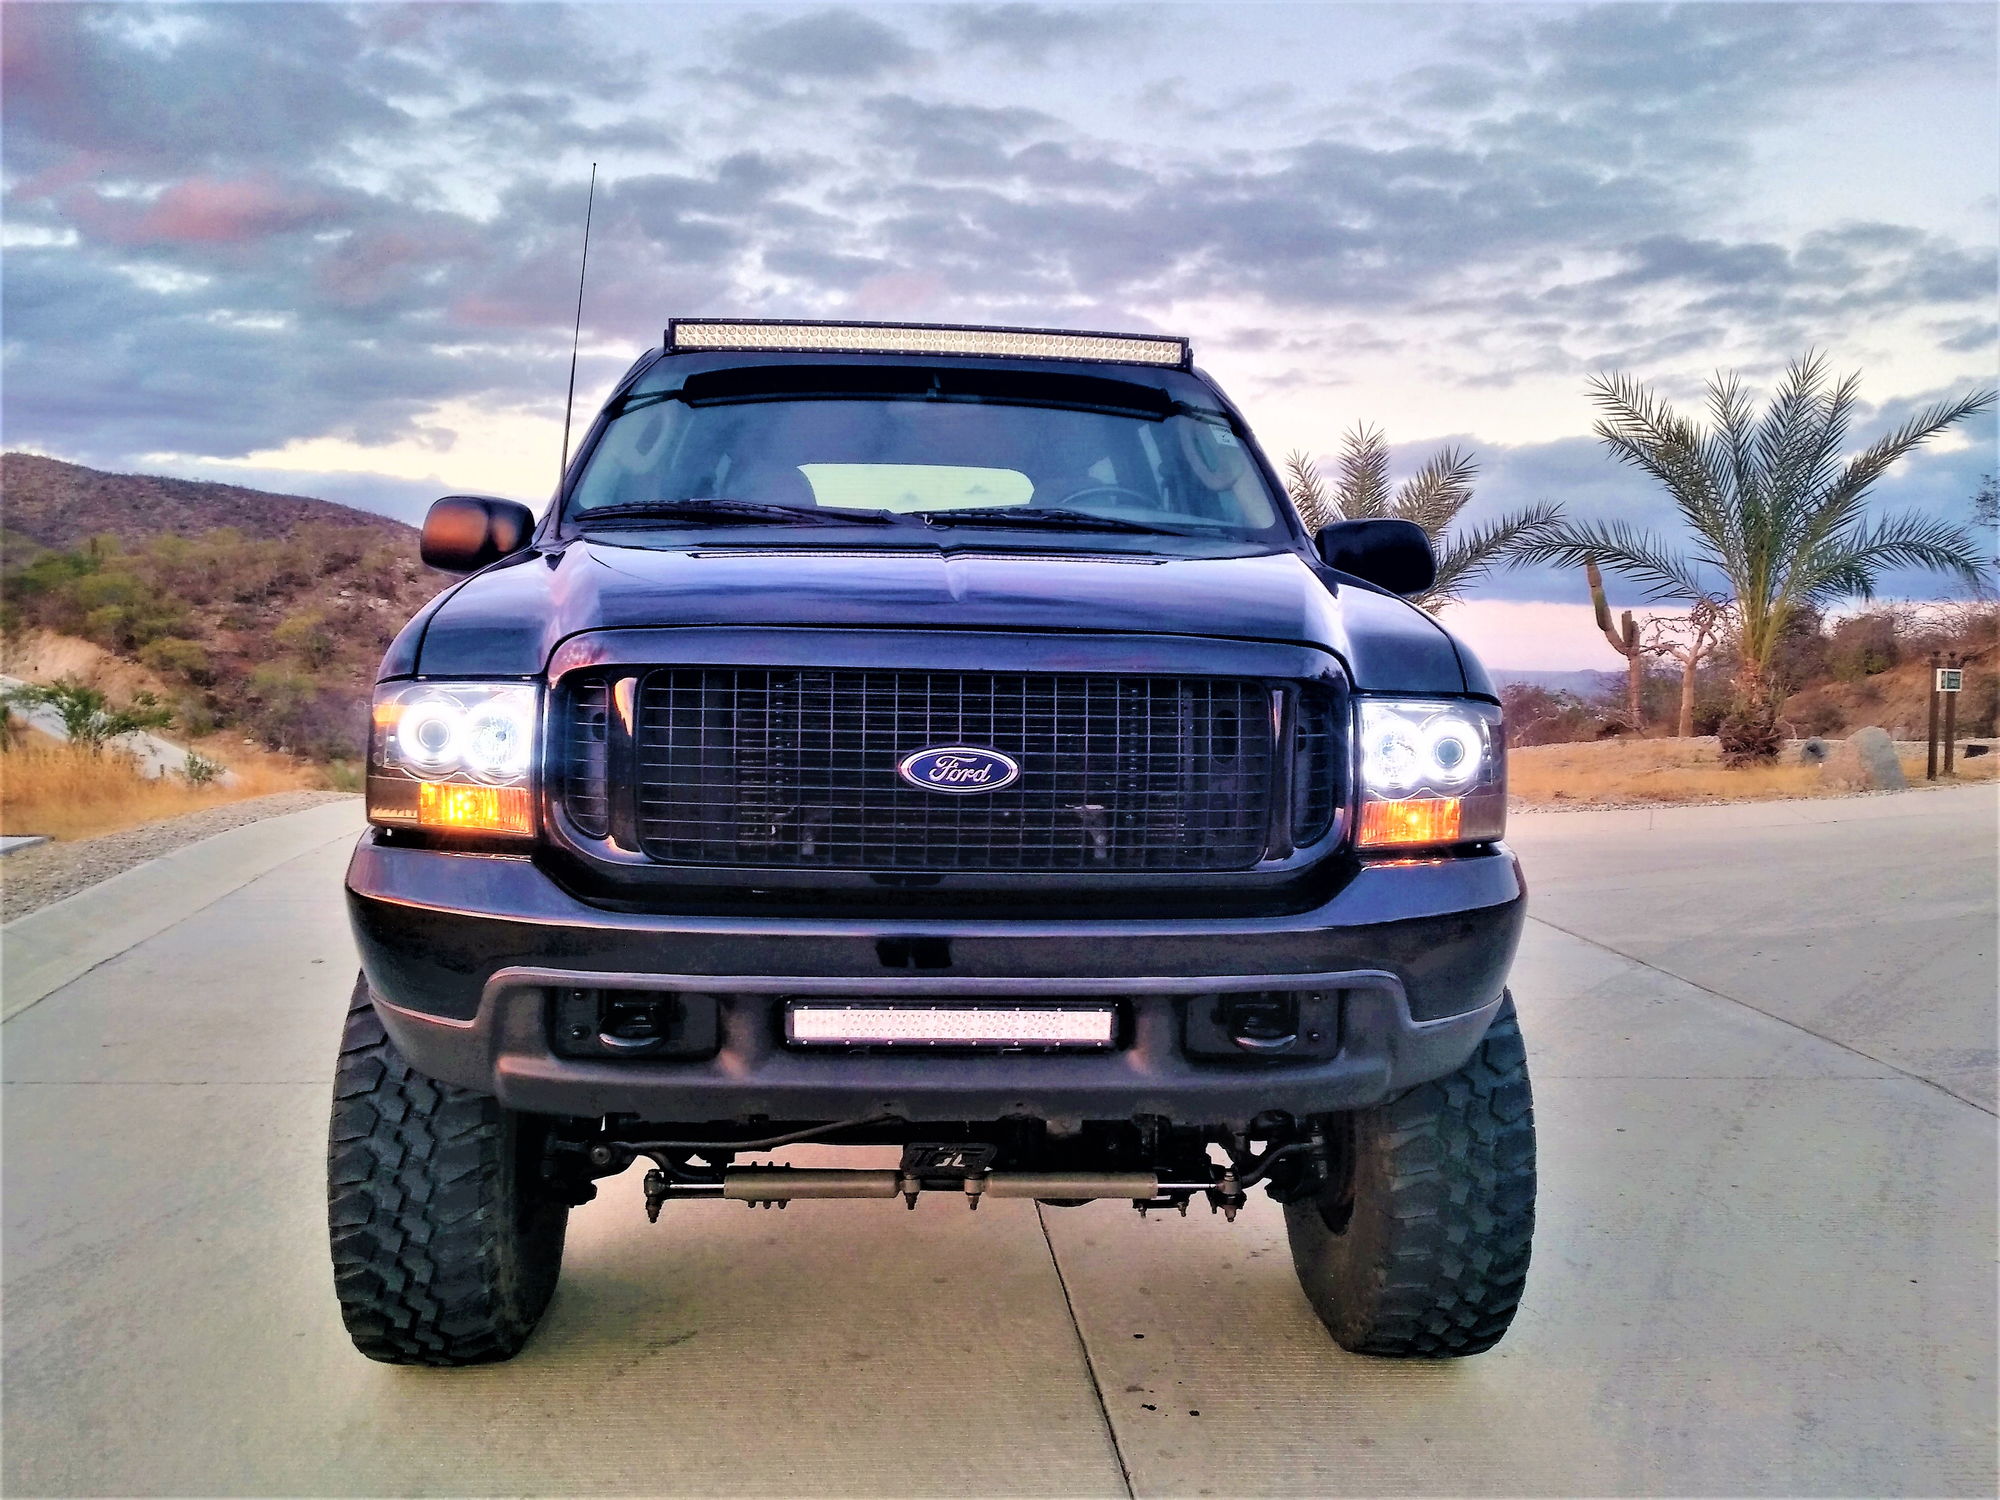 Lets see all of your lifted Excursions - Page 109 - Ford ...